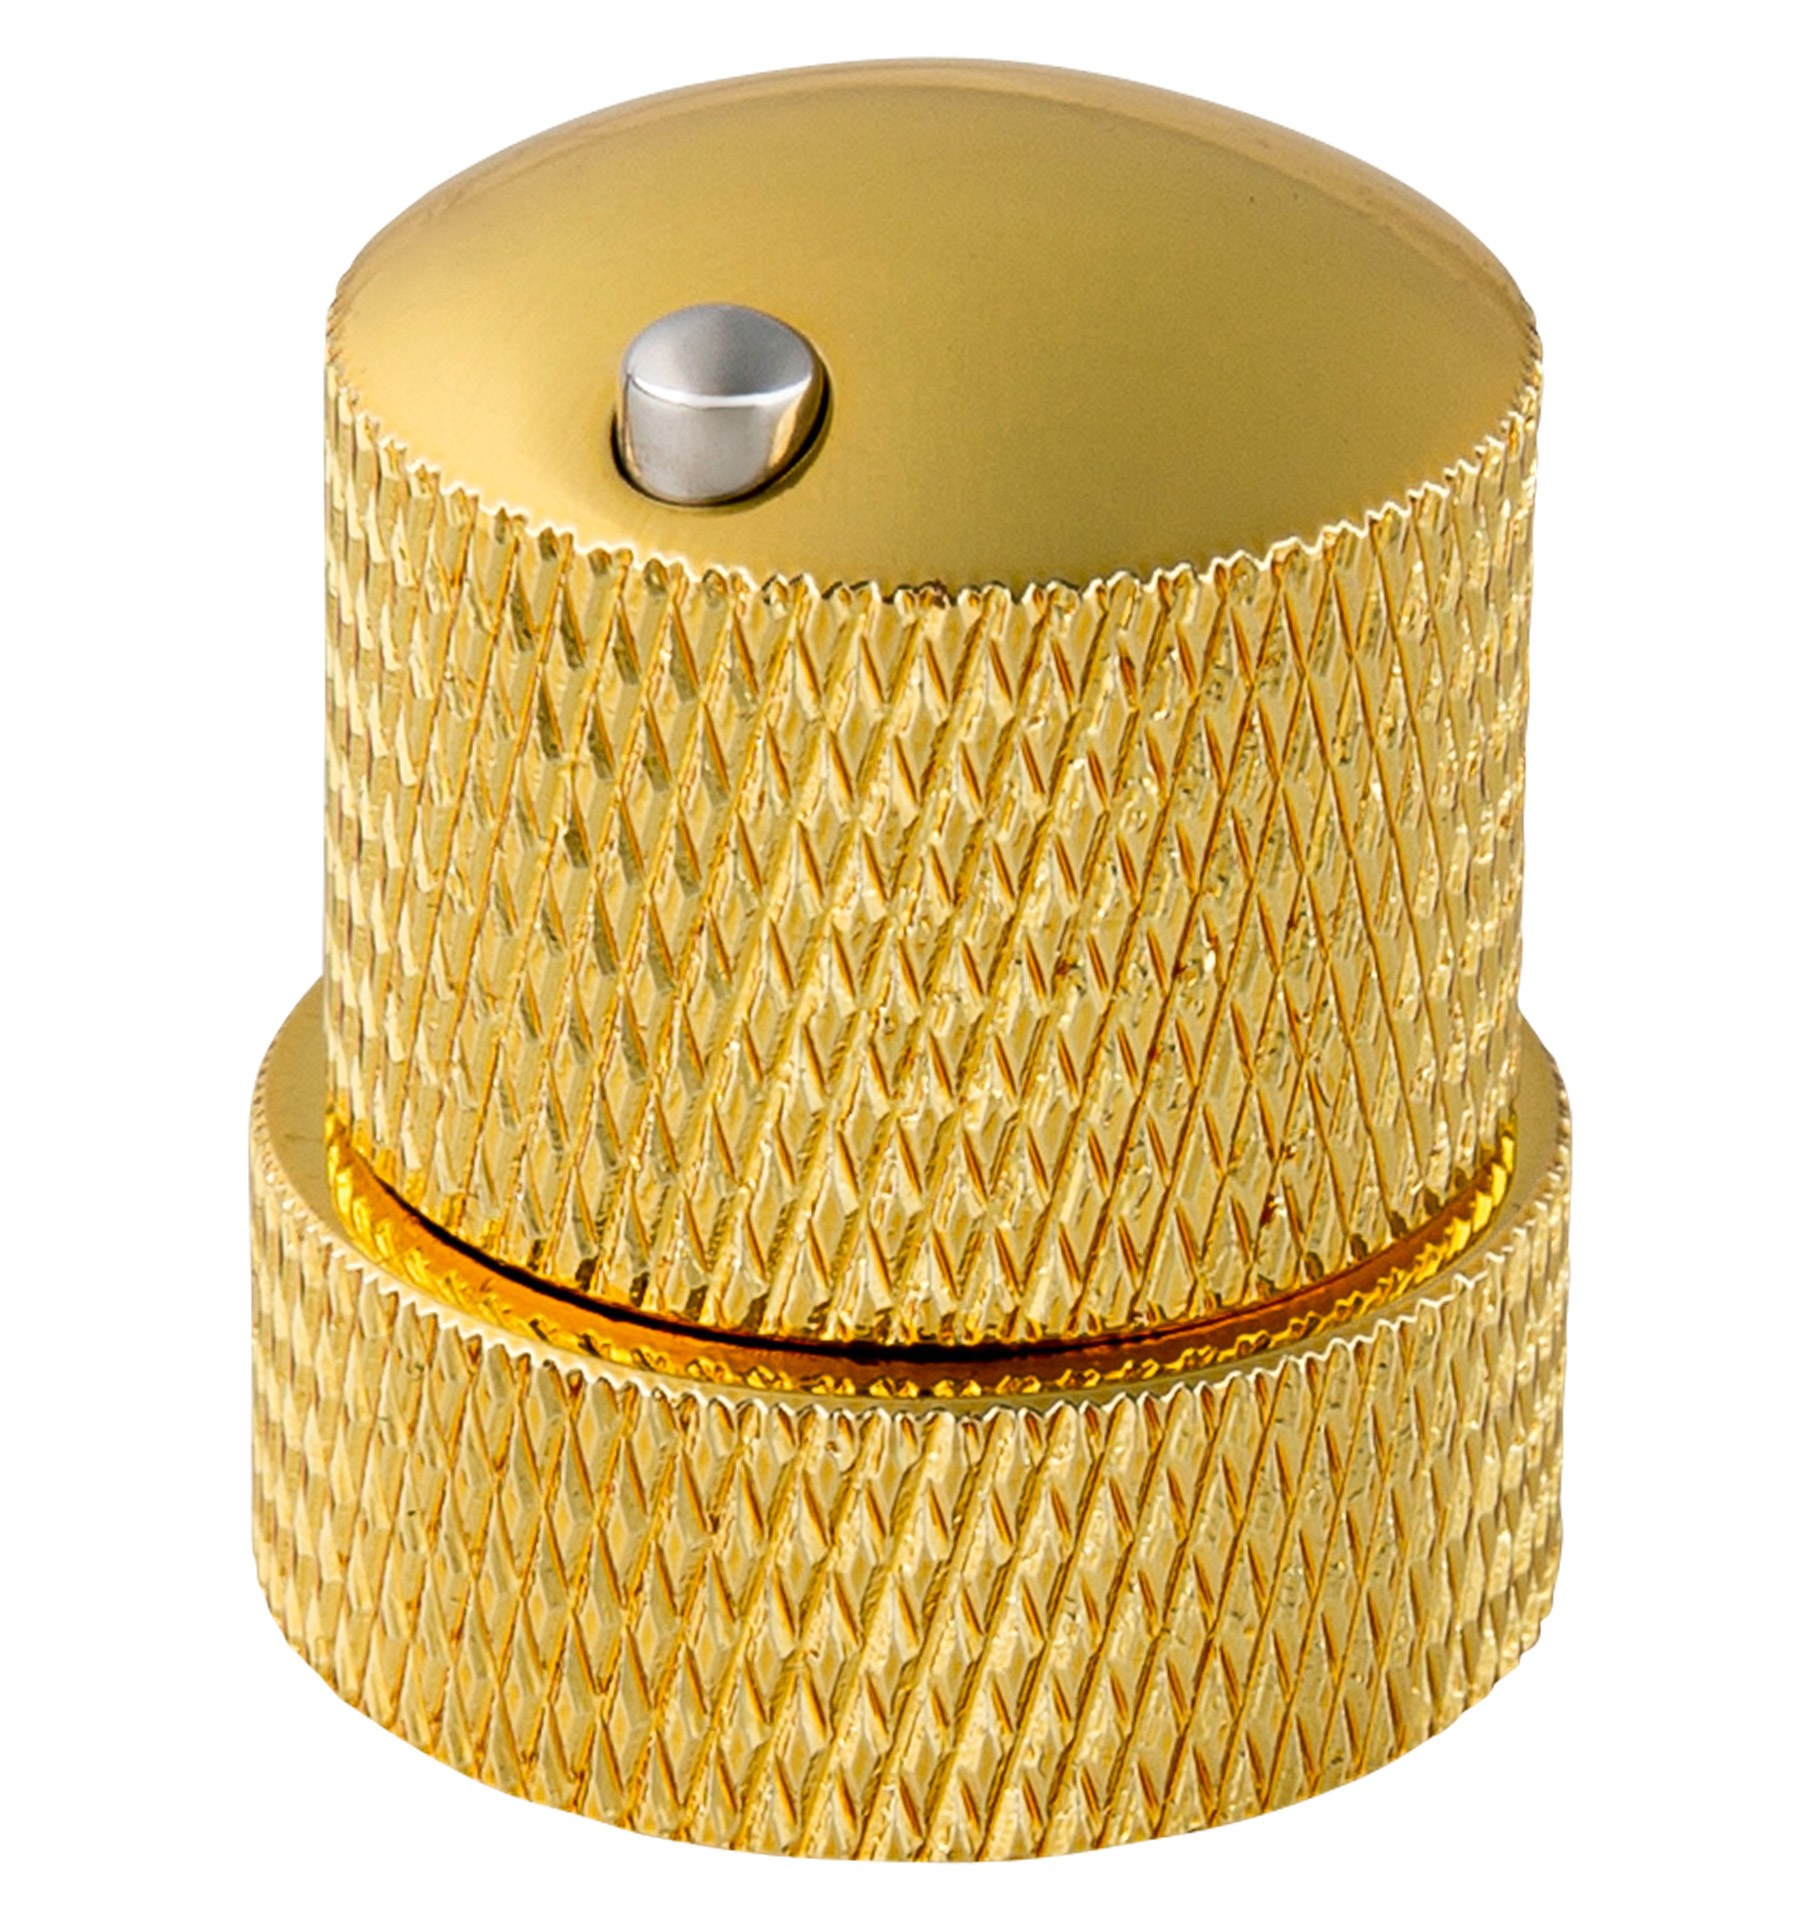 Framus & Warwick Parts - Stacked Potentiometer Dome Knob with Convex Indicator - Gold